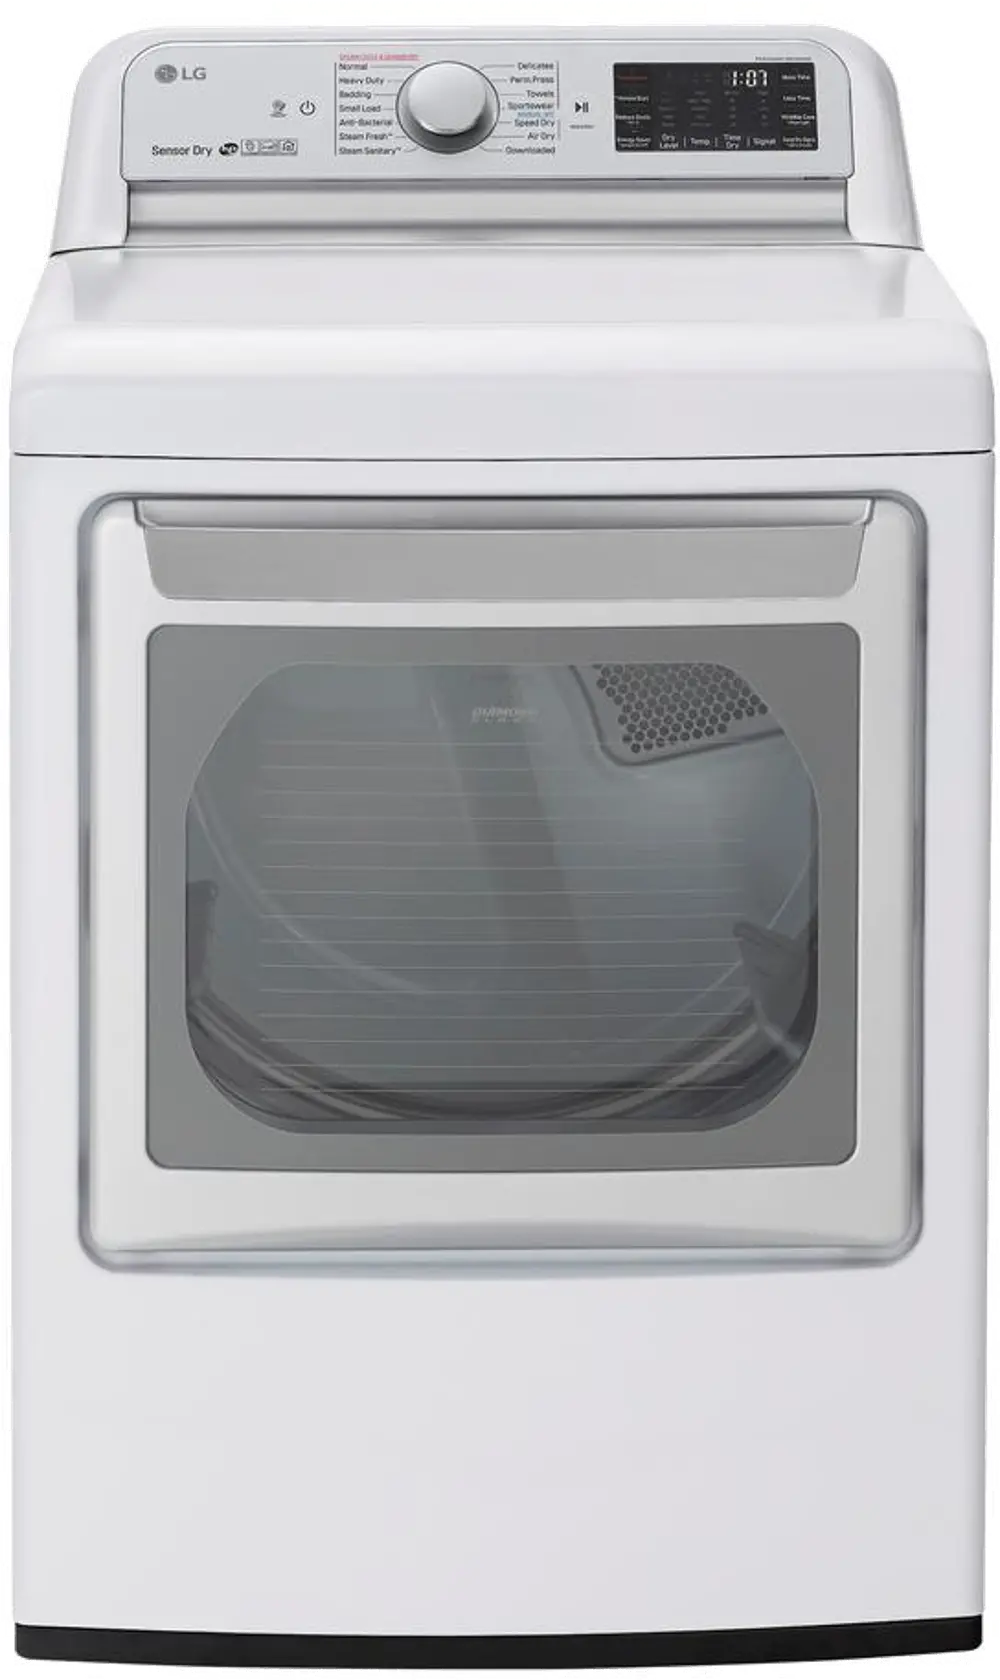 DLEX7800WE LG WiFi Electric Dryer with TurboSteam - White 7.3 cu.ft.-1